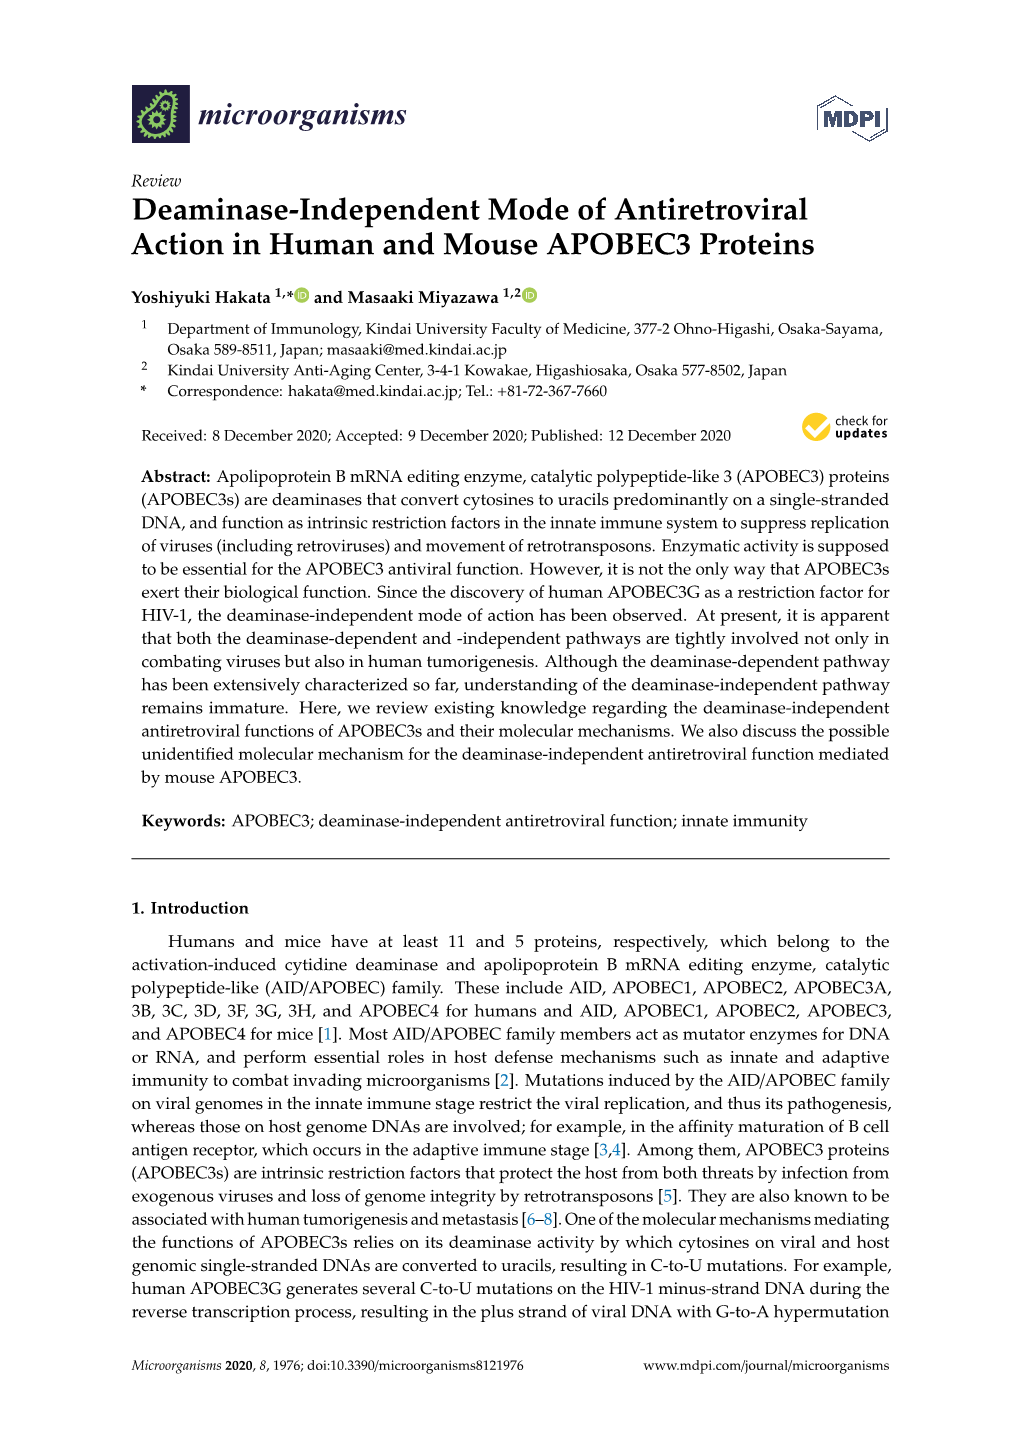 Deaminase-Independent Mode of Antiretroviral Action in Human and Mouse APOBEC3 Proteins